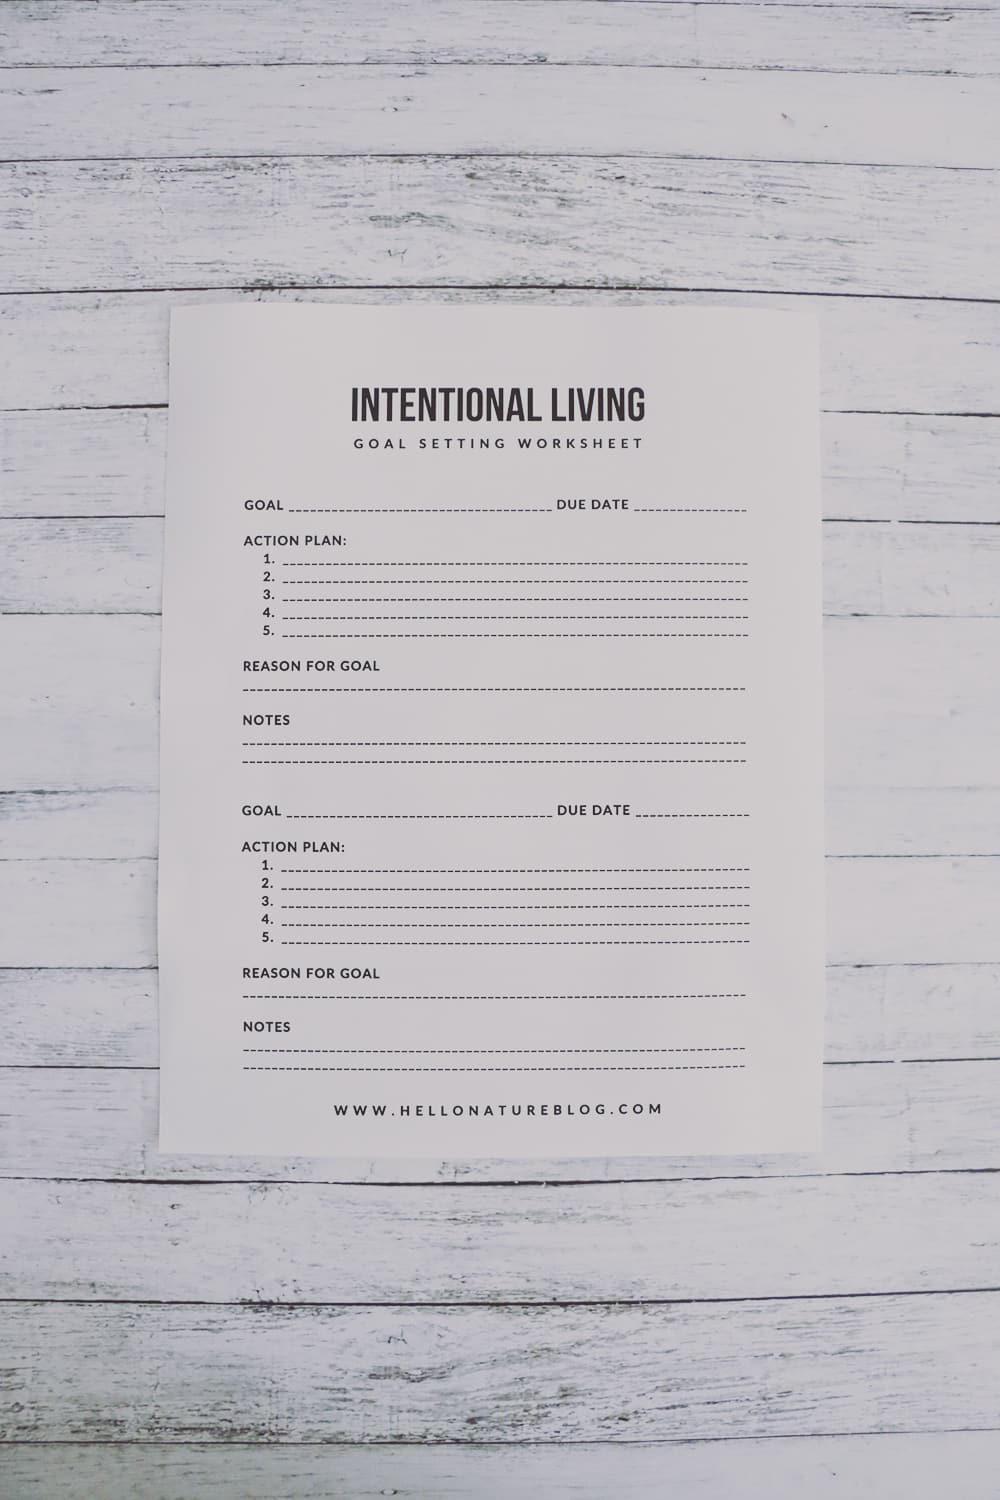 Living intentionally doesn't have to be hard. This goal setting worksheet will help you achieve your mindful goals in no time!